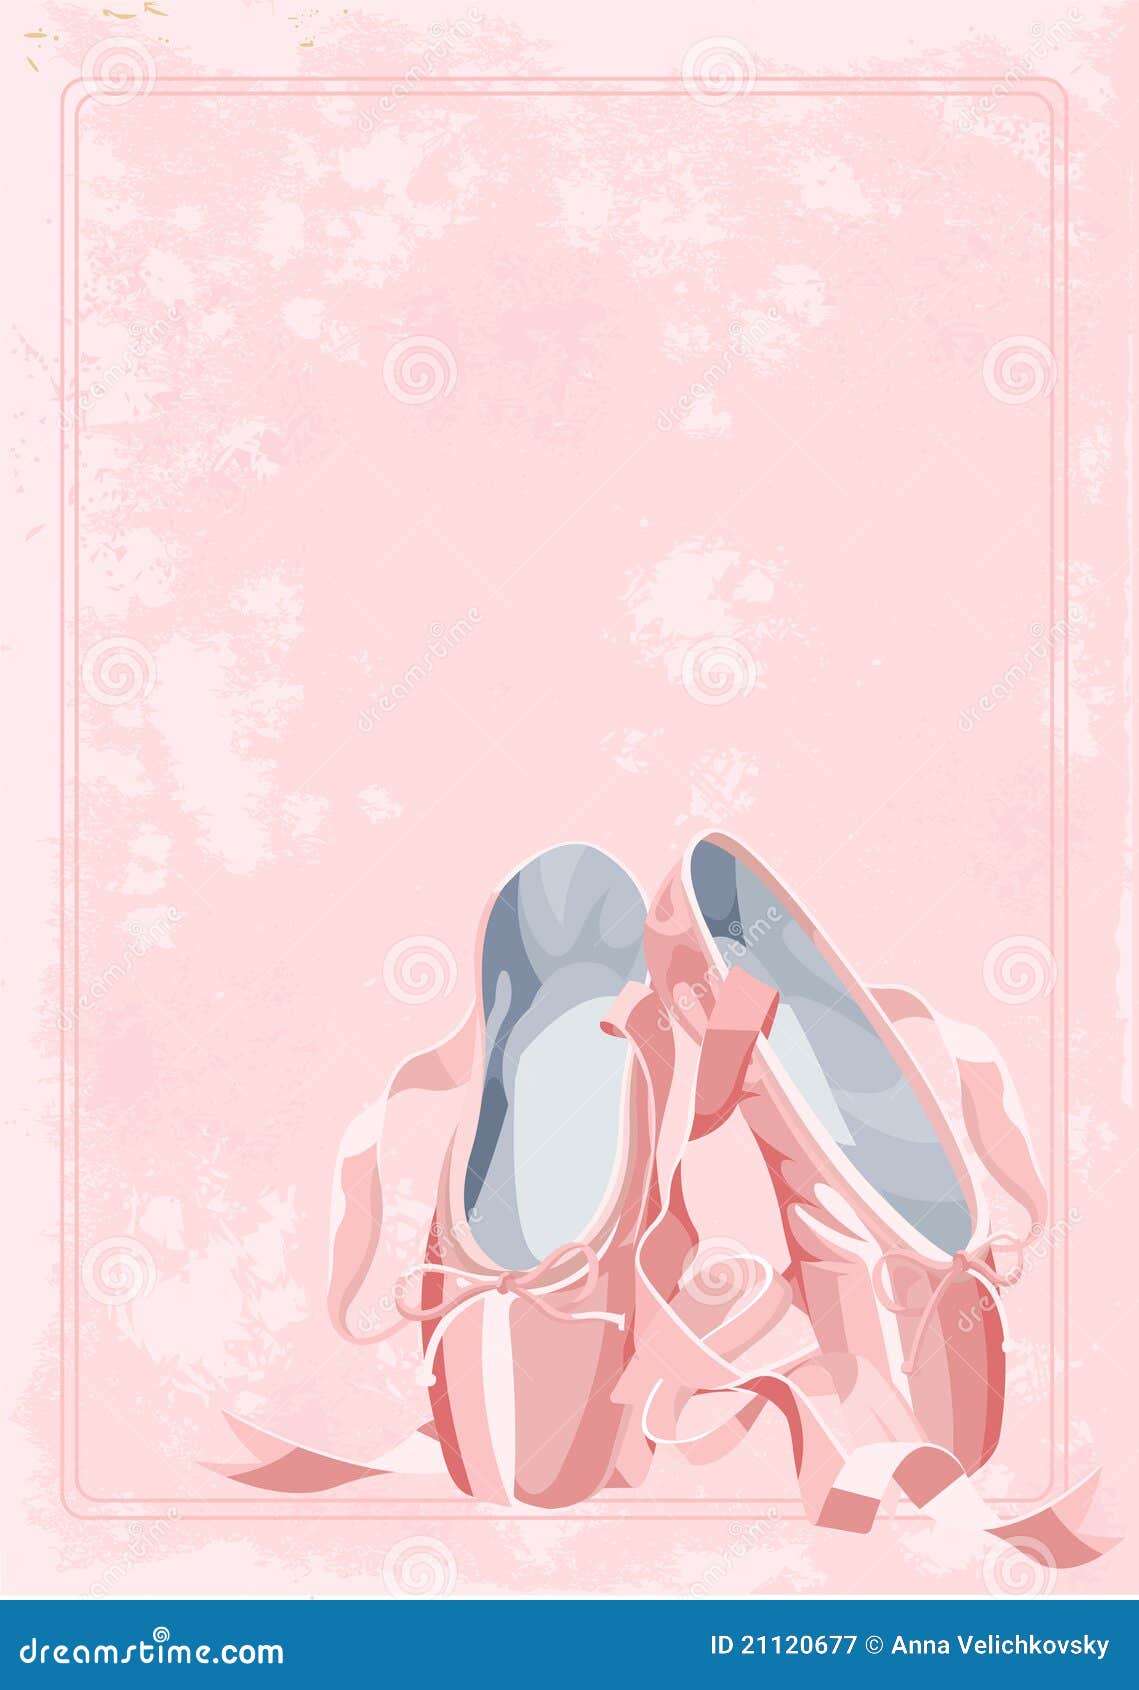 Ballet slippers background stock vector. Image of pastel - 21120677